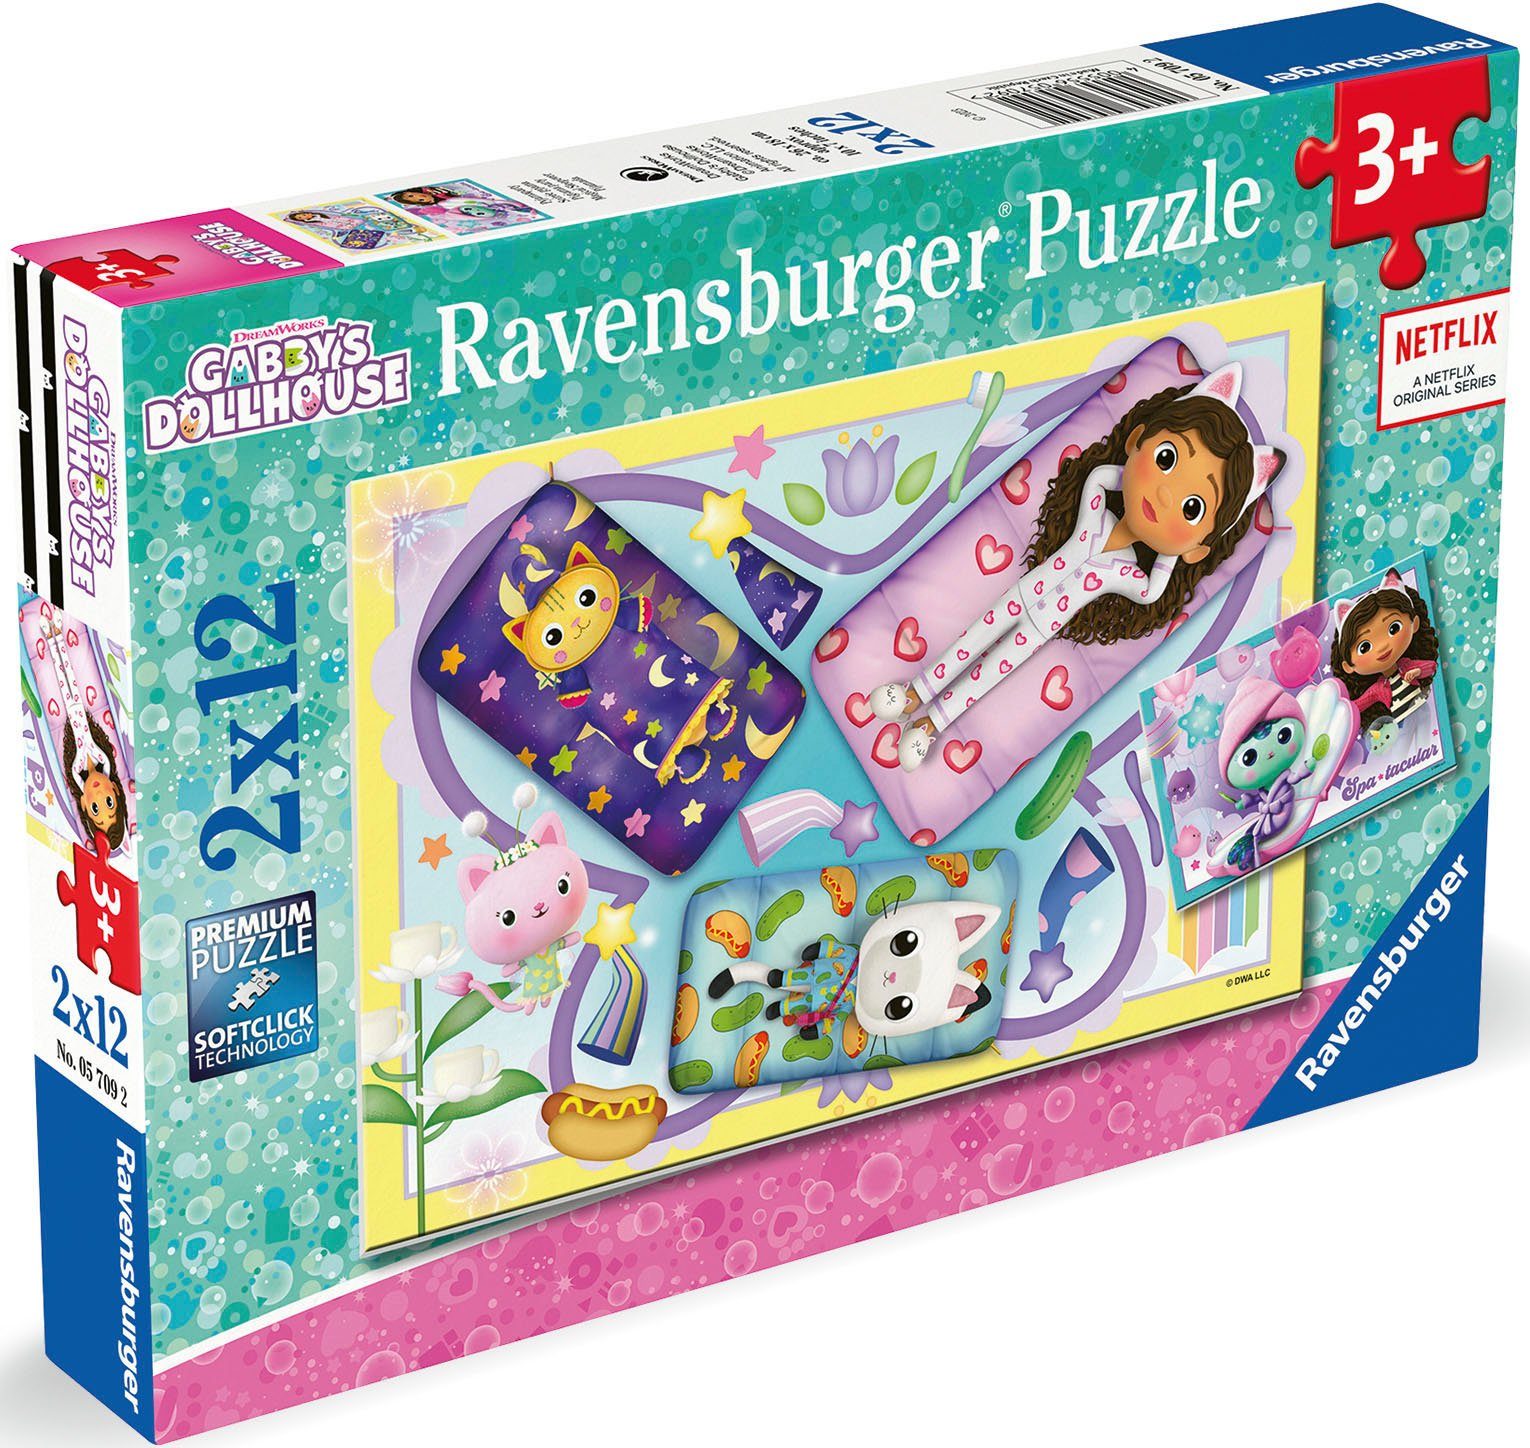 Made Gabby's 2x12, Puzzle 24 Dollhouse, in Puzzleteile, Ravensburger Europe